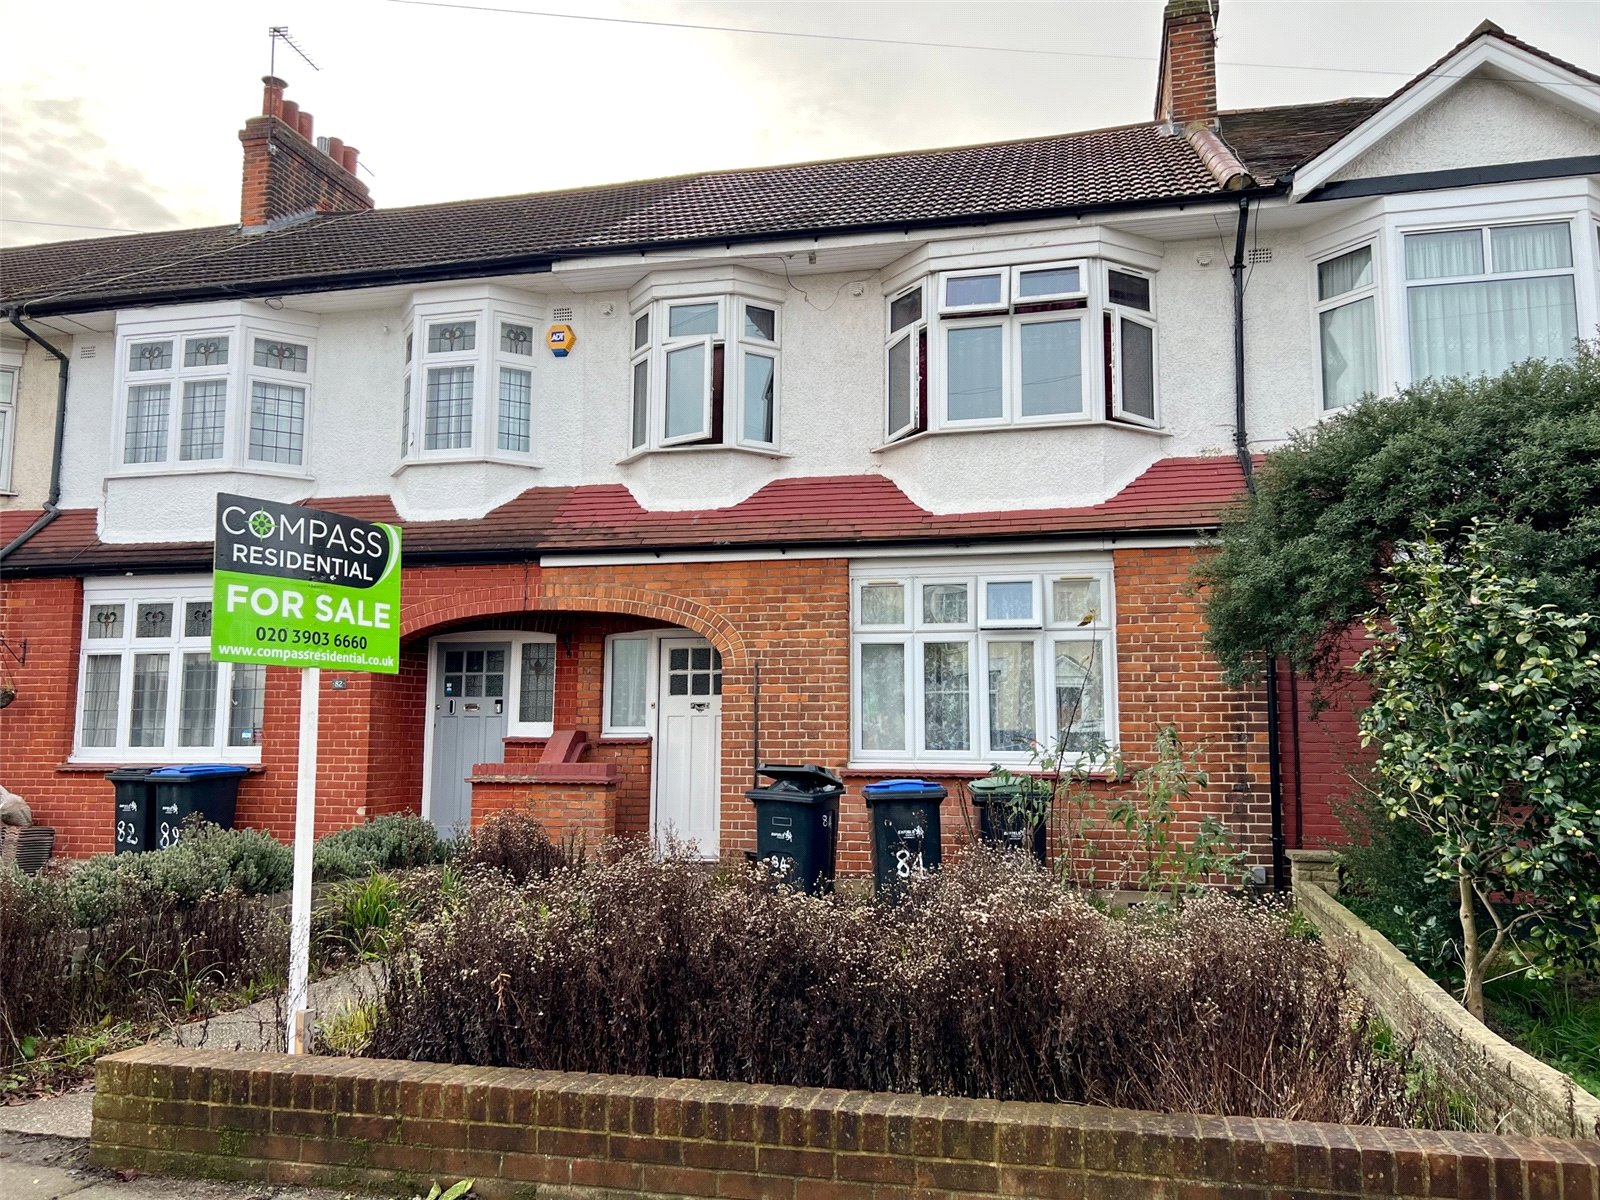 3 bed  for sale in Ridge Road, Winchmore Hill, N21 